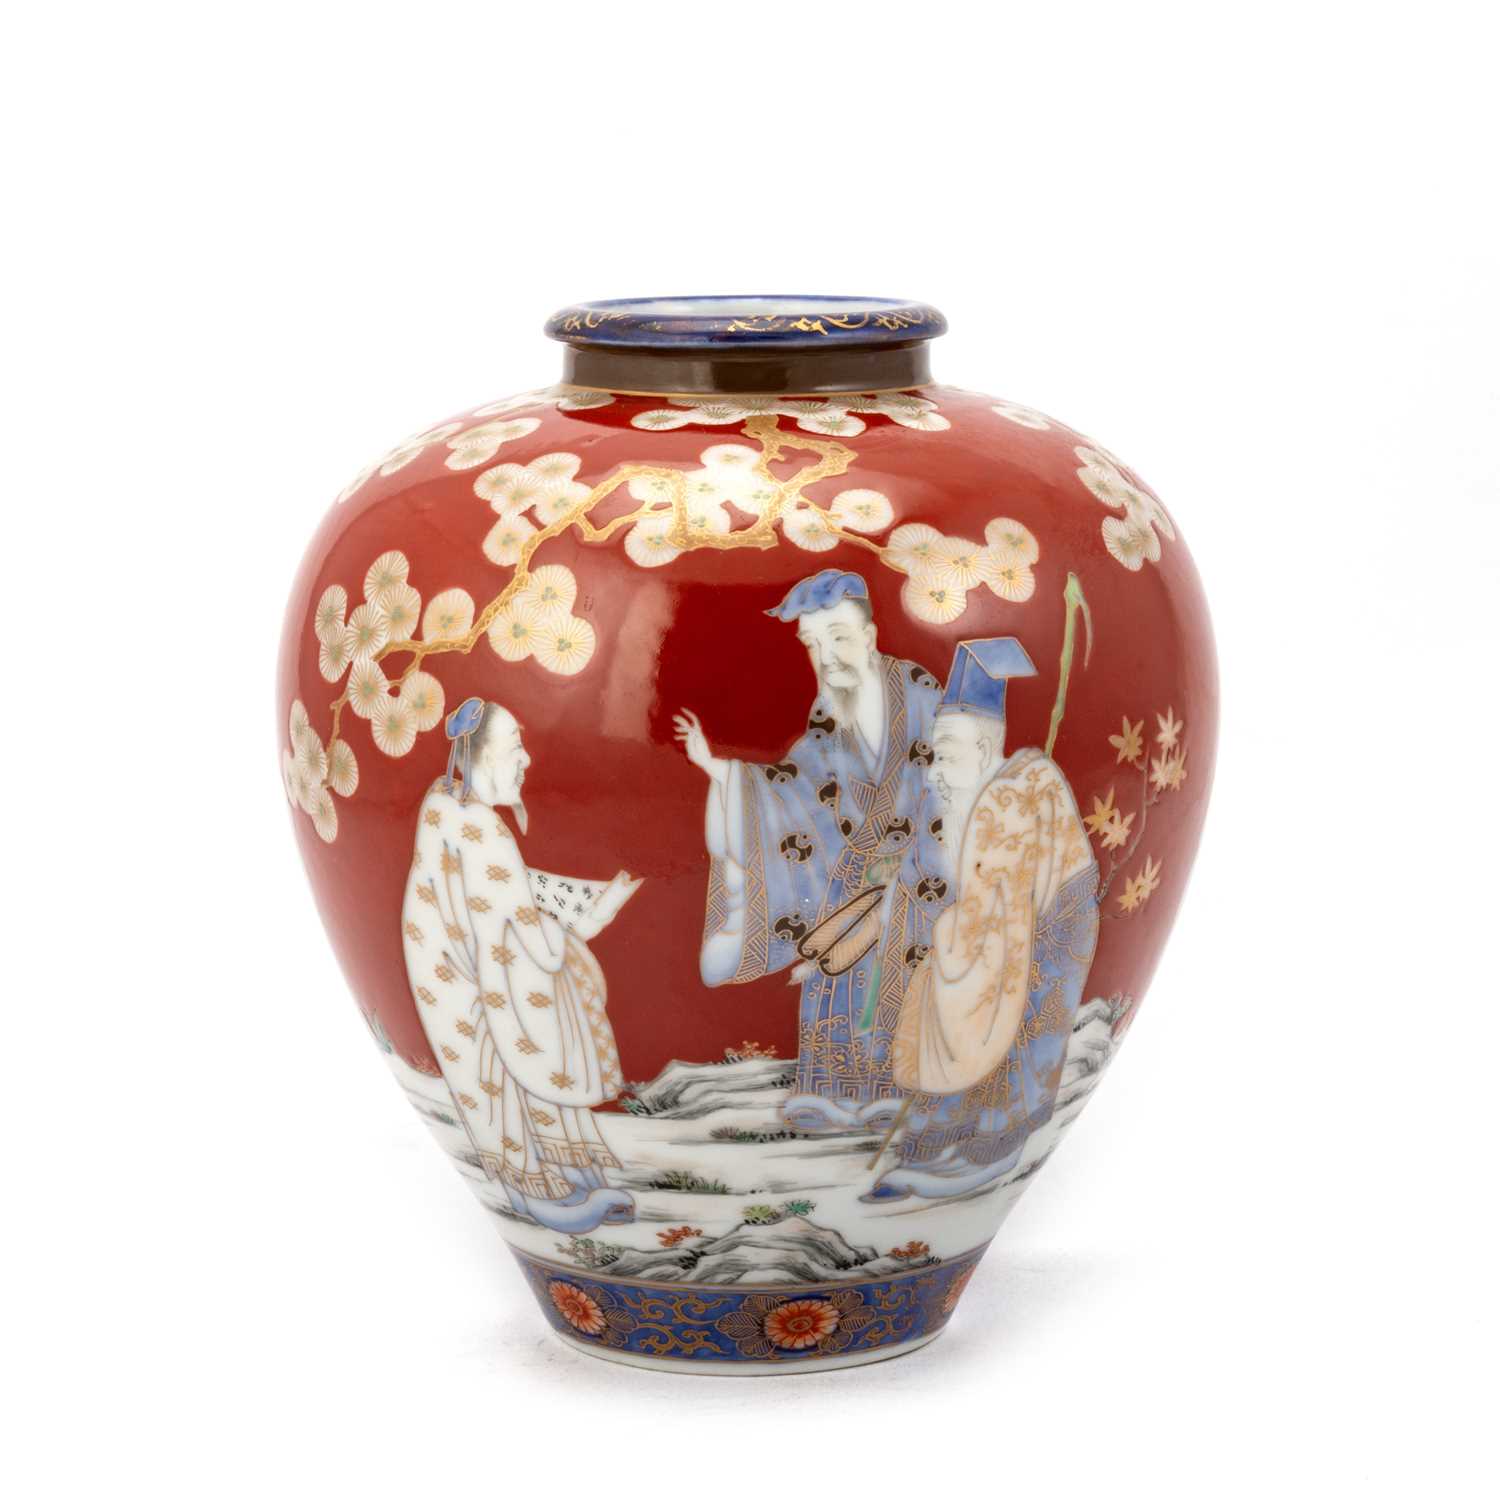 A FUKAGAWA RED-GROUND VASE, JAPANESE, EARLY 20TH CENTURY - Image 2 of 3